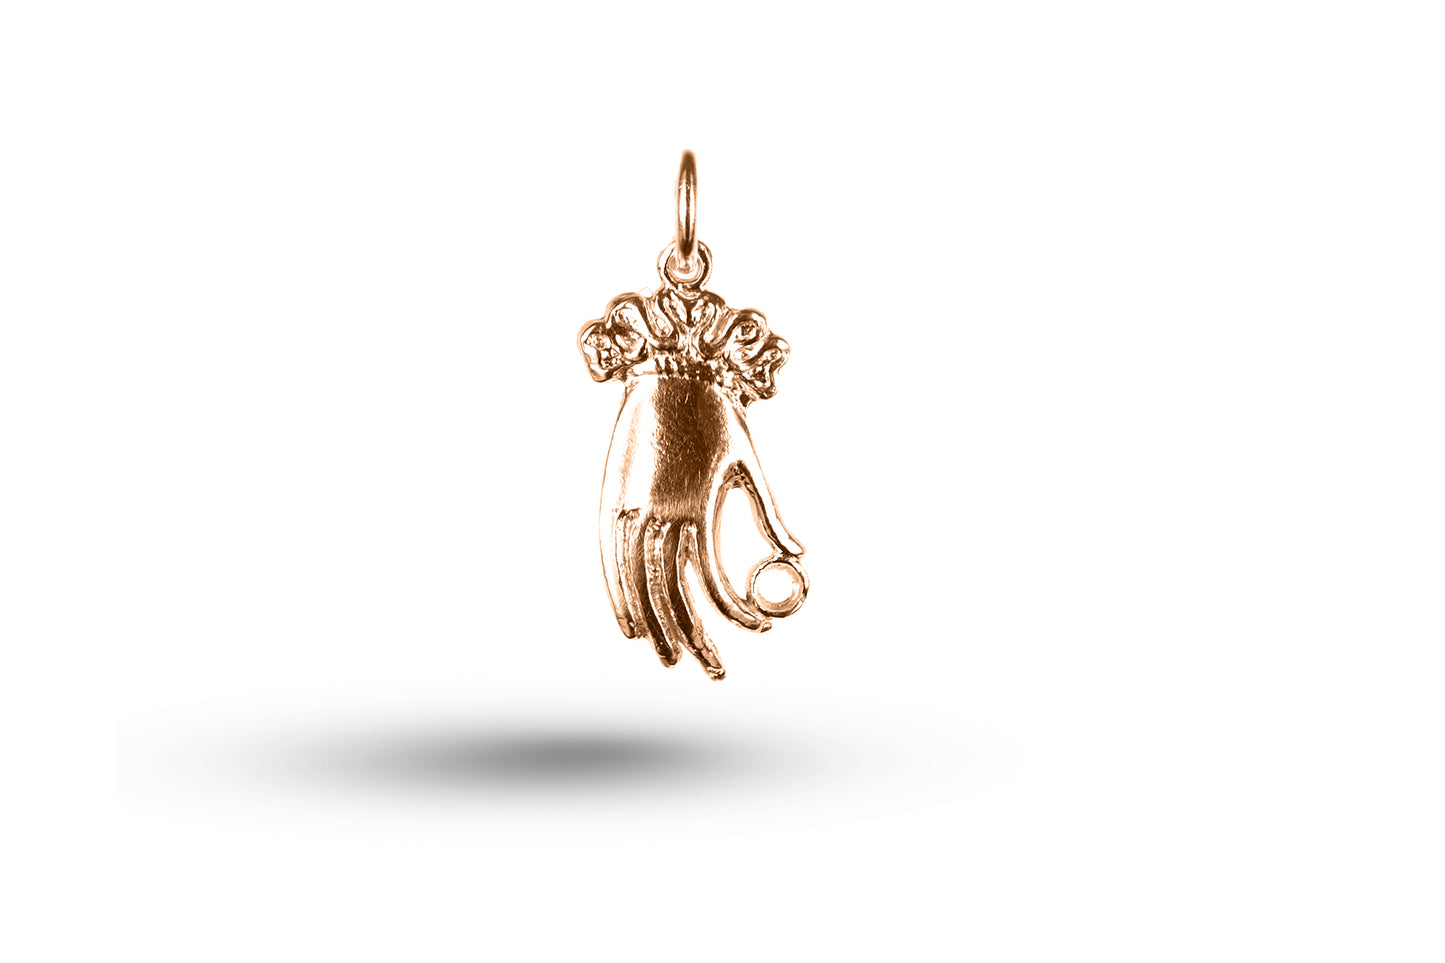 Luxury rose gold Art Nouveau hand with ring charm.